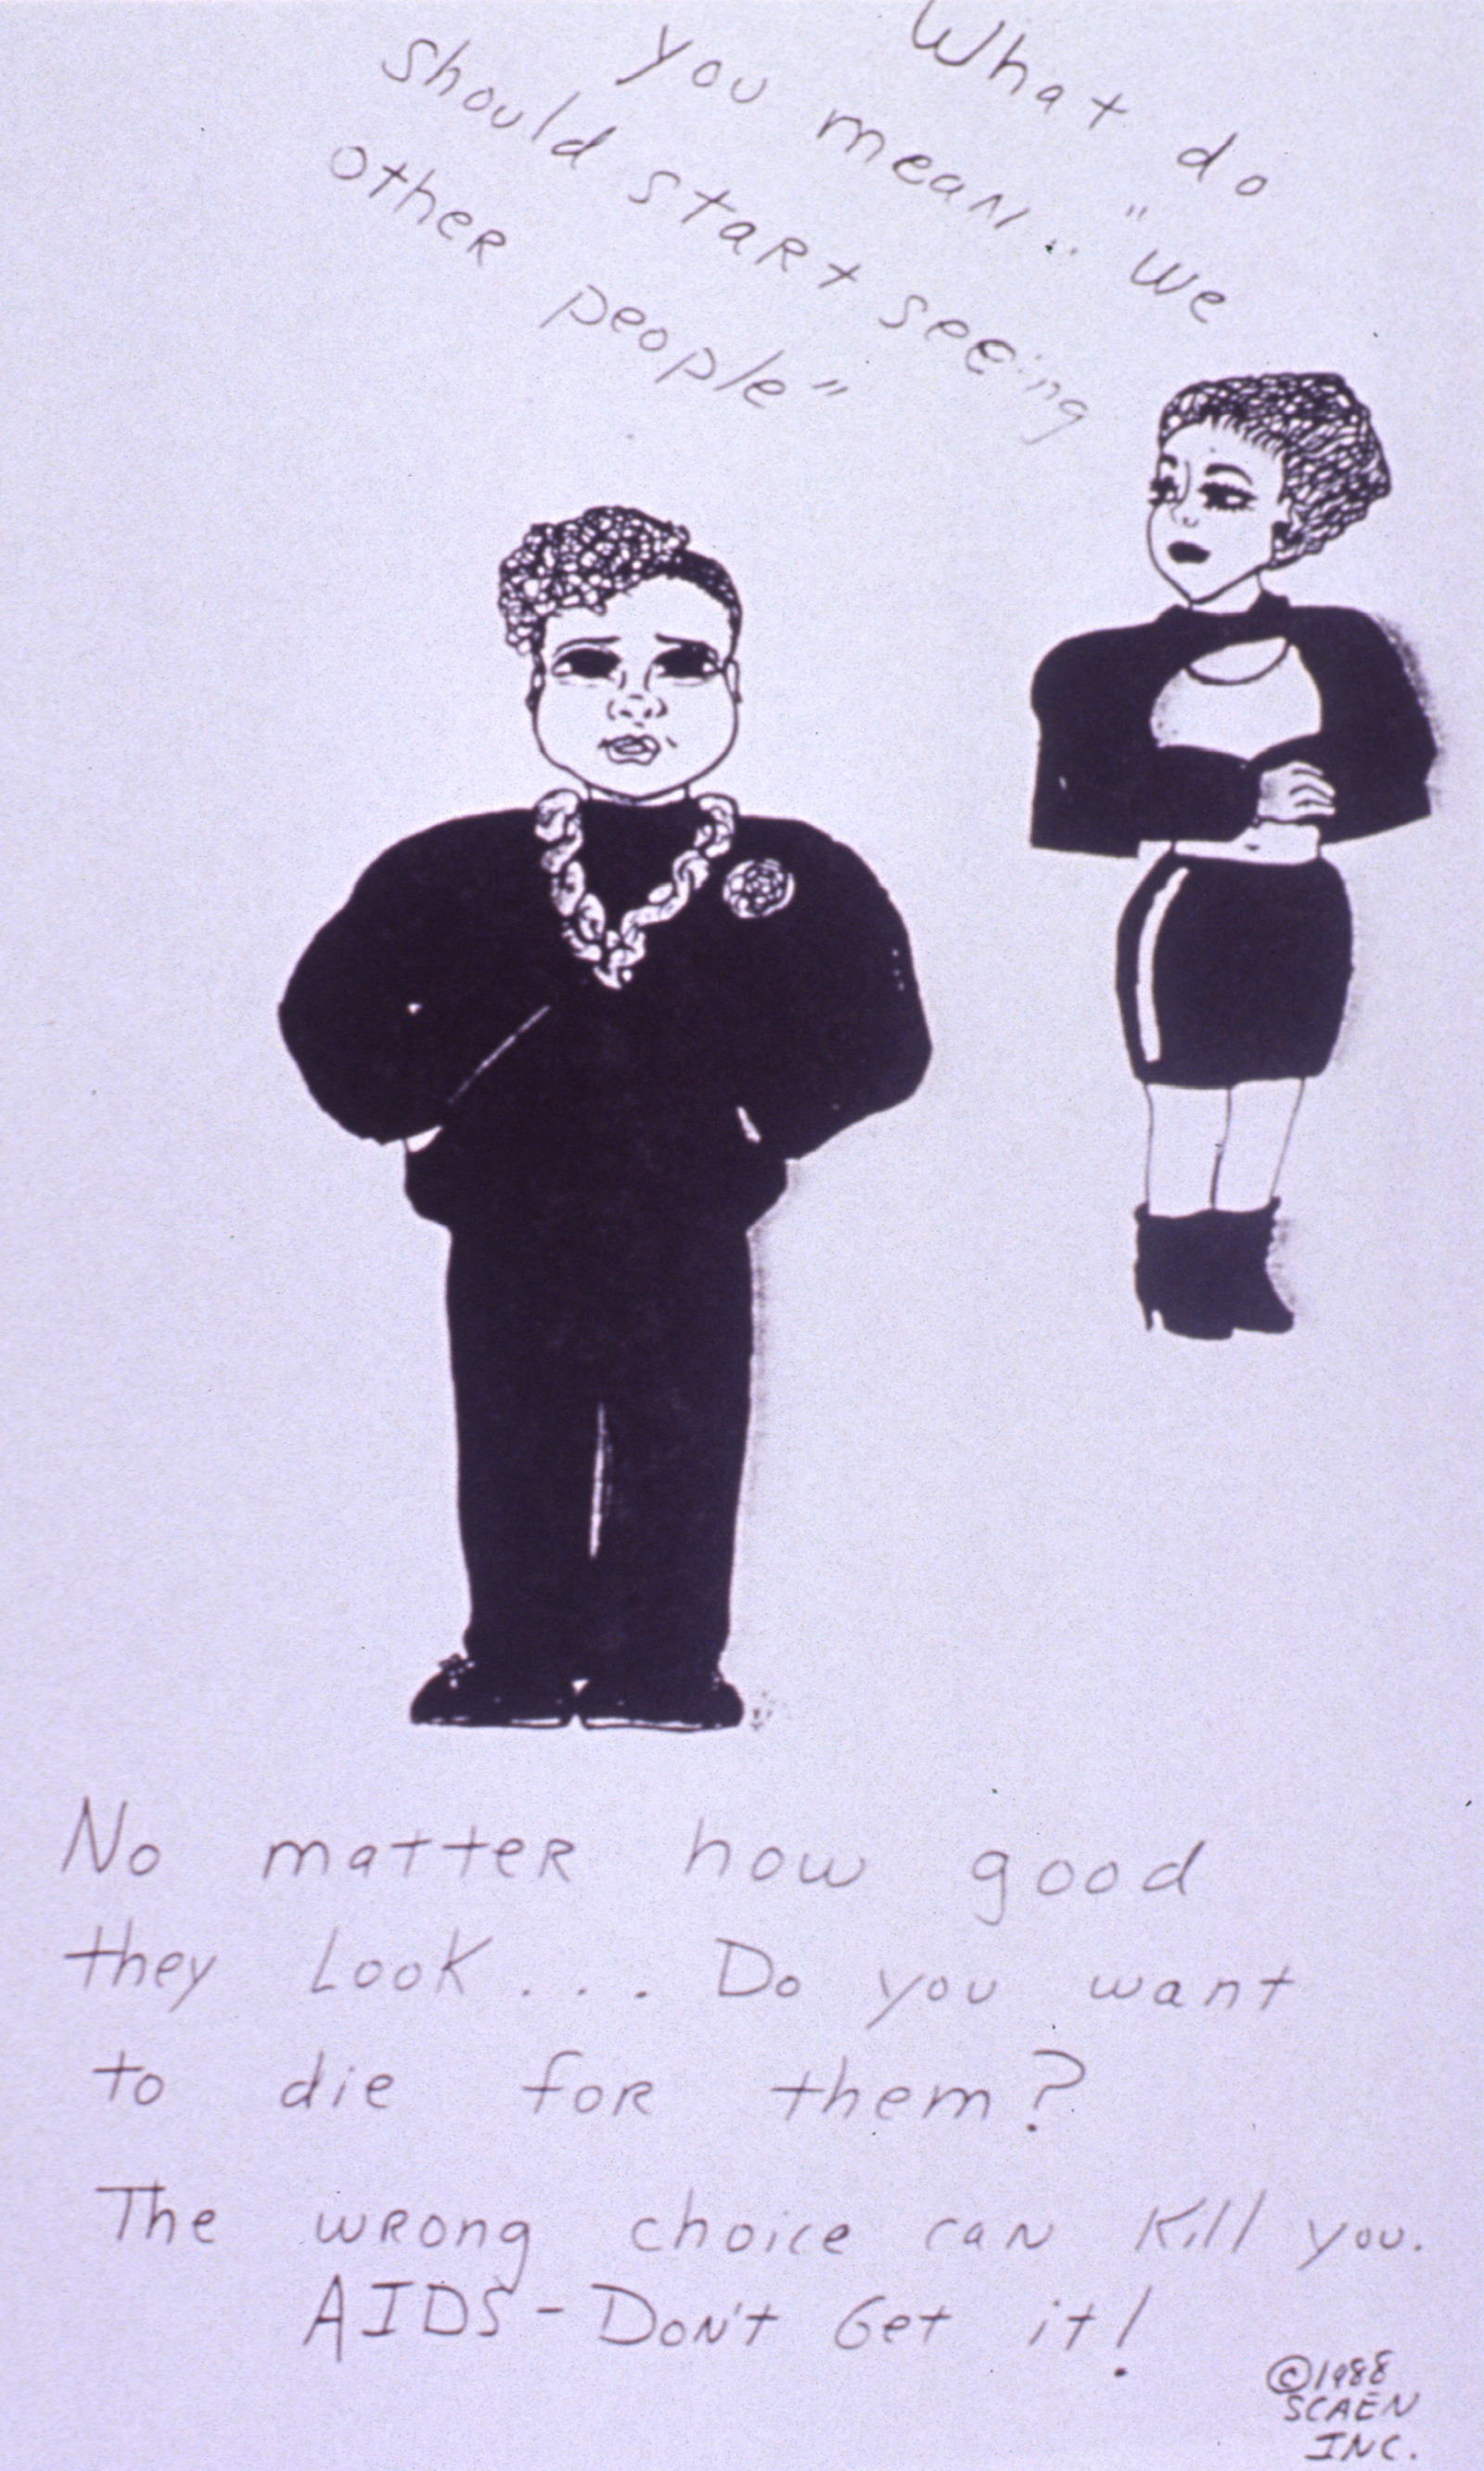 Drawing of a standing African American women, one with her hands in her pocket, the other with her arms cross, surrounded by handwritten text